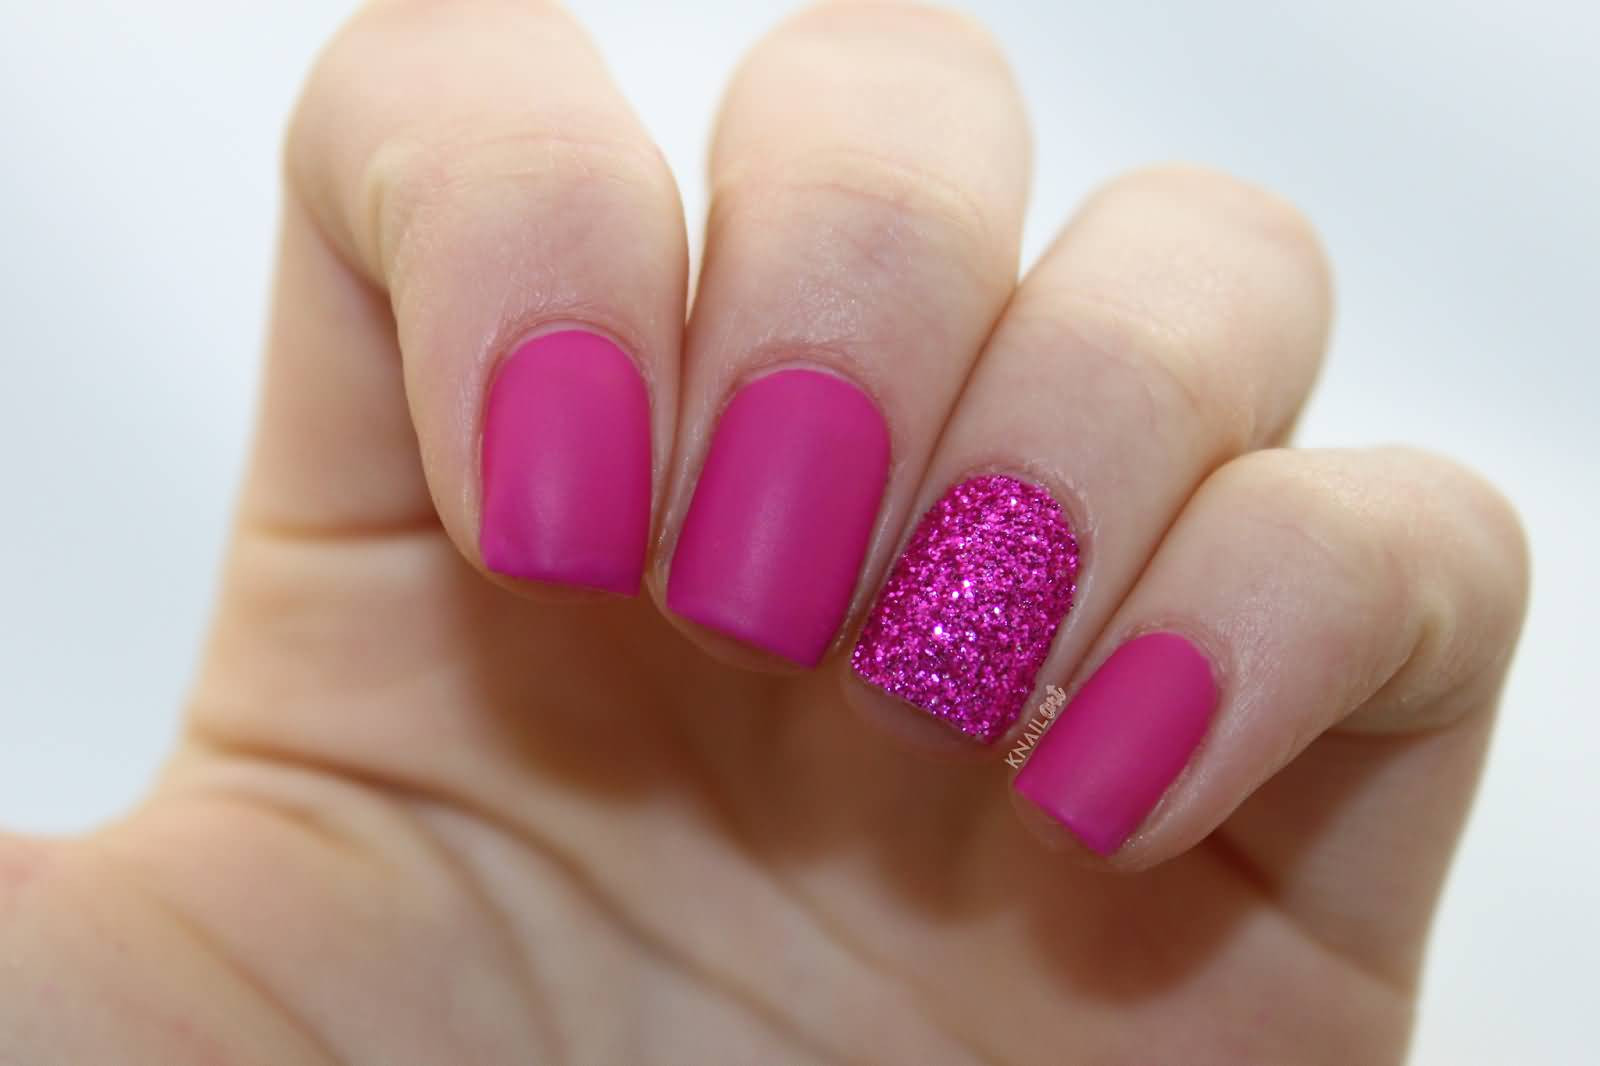 Pink Glitter Nail Designs
 65 Incredible Glitter Accent Nail Art Ideas You Need To